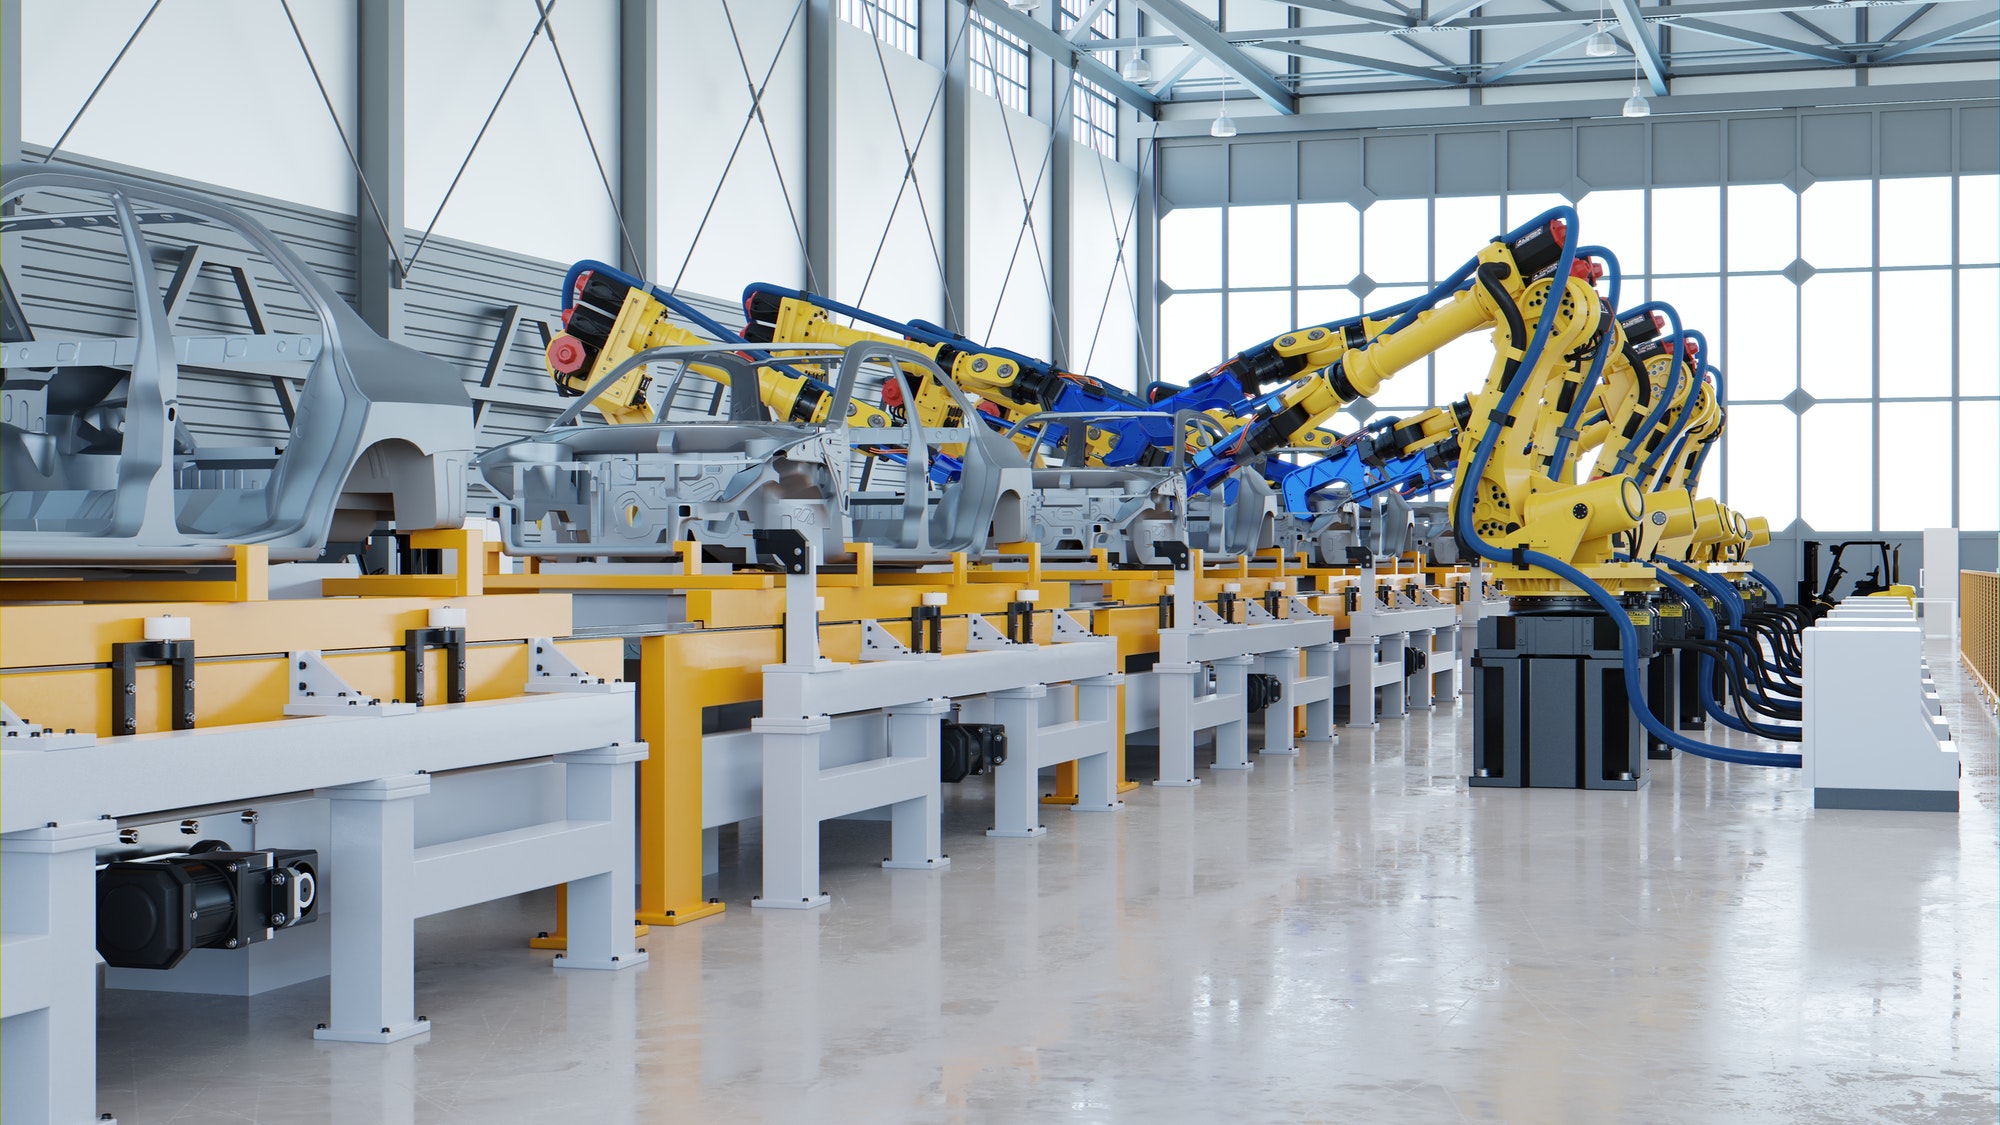 Robotic automotive assembly in factory.